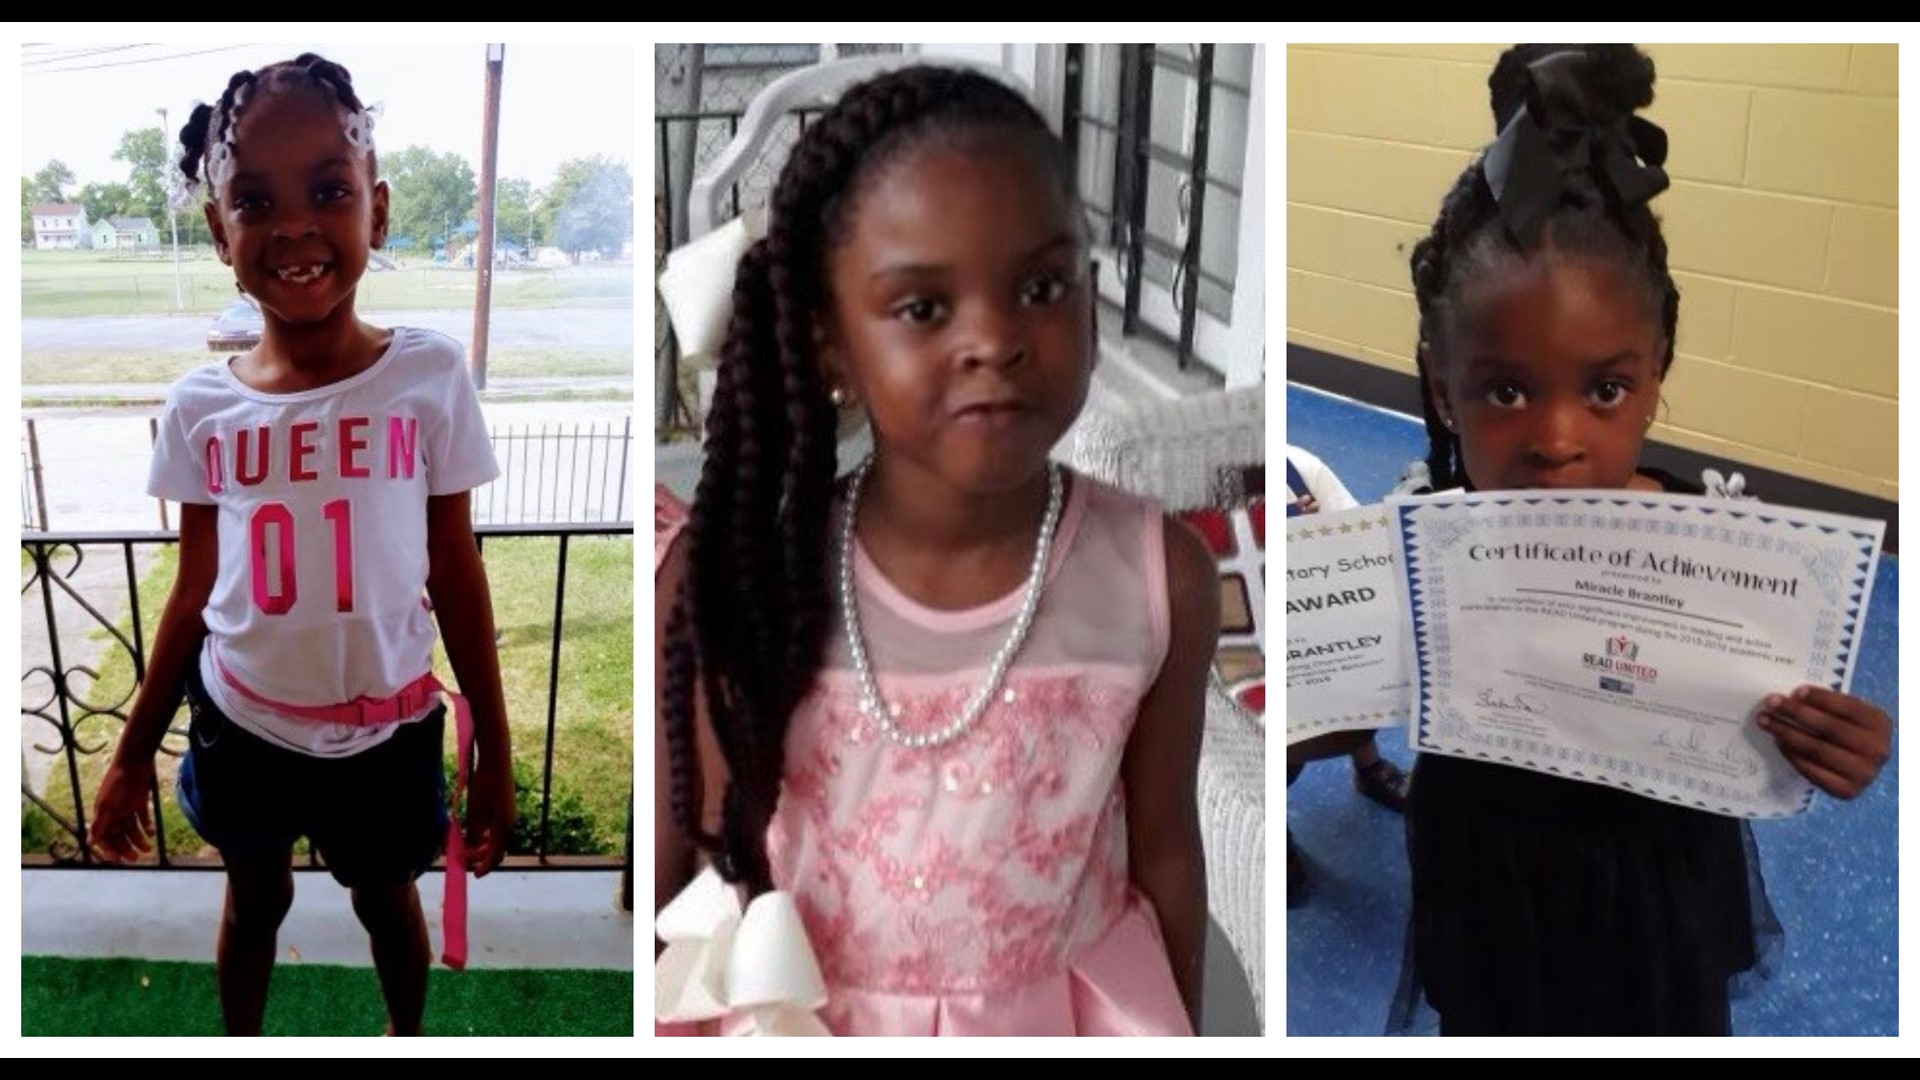 8-year-old Miracle Brantley was pronounced dead from her injuries around 8 a.m. Sunday morning